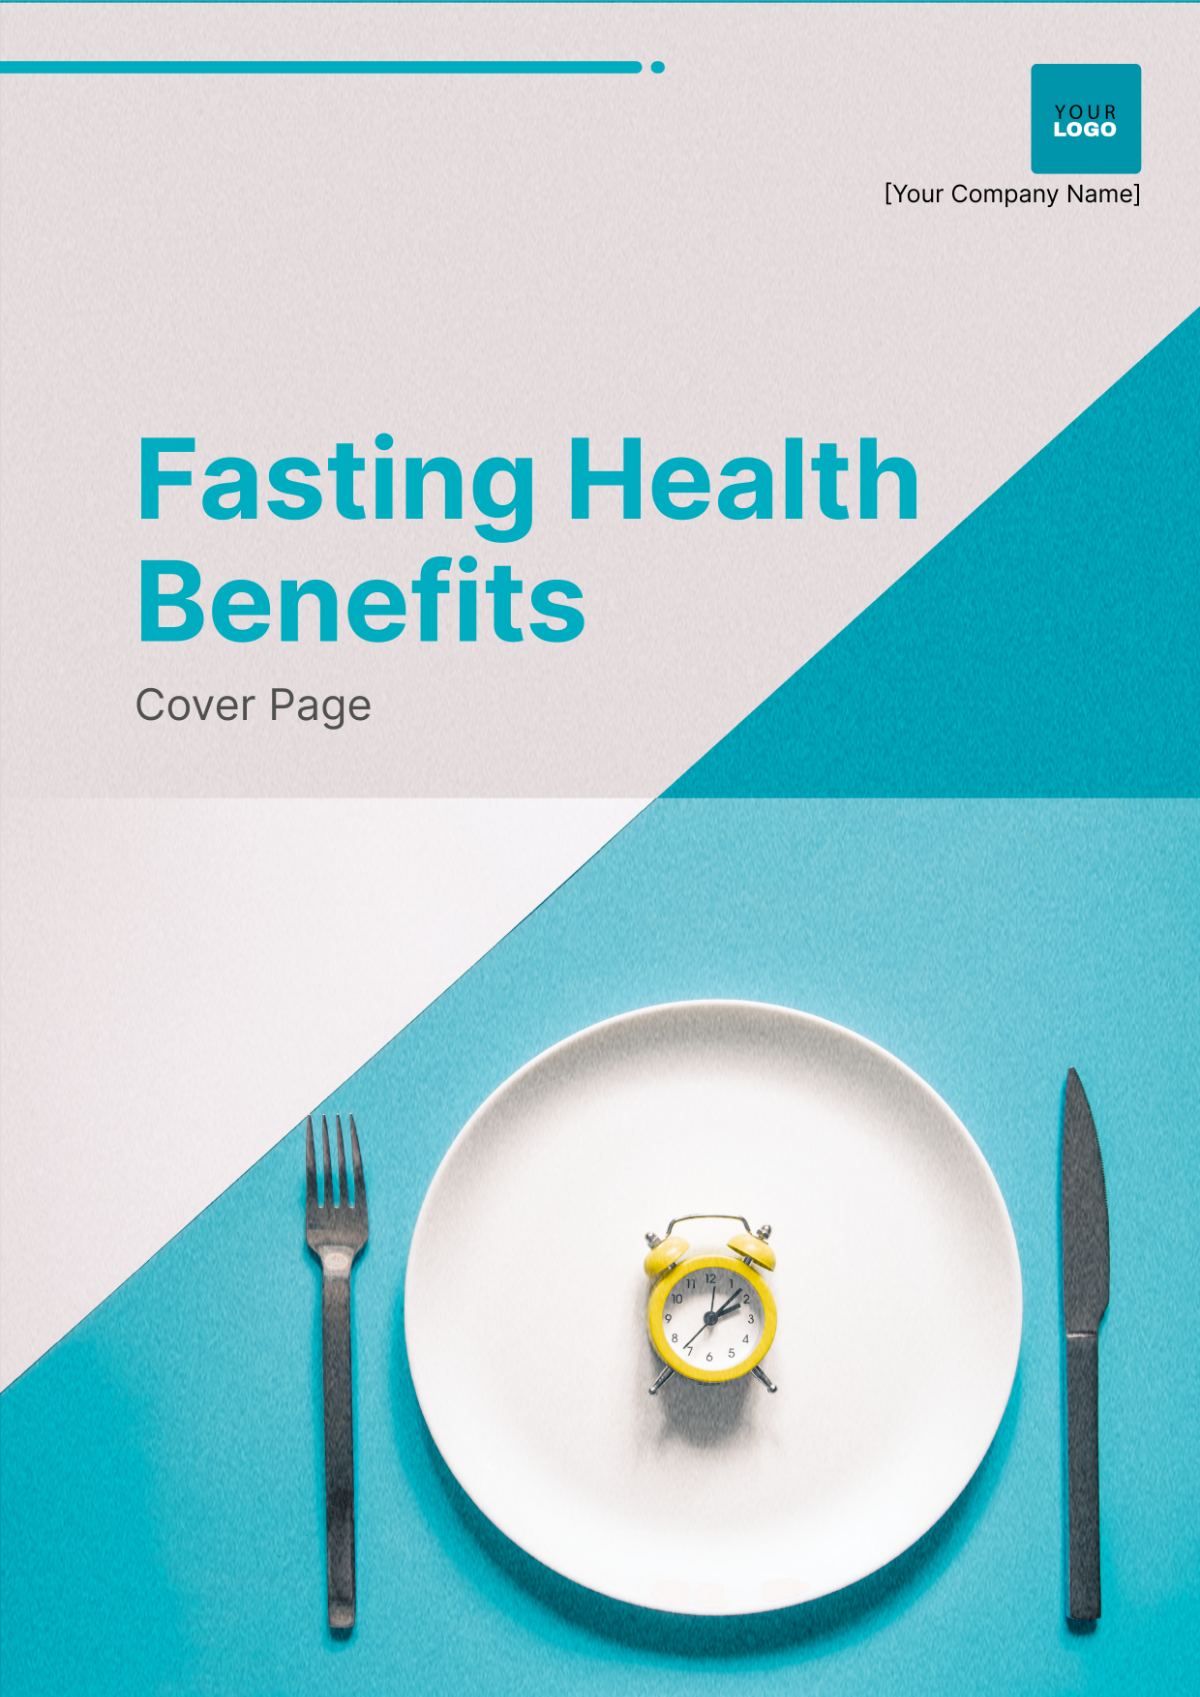 Fasting Health Benefits Cover Page Template